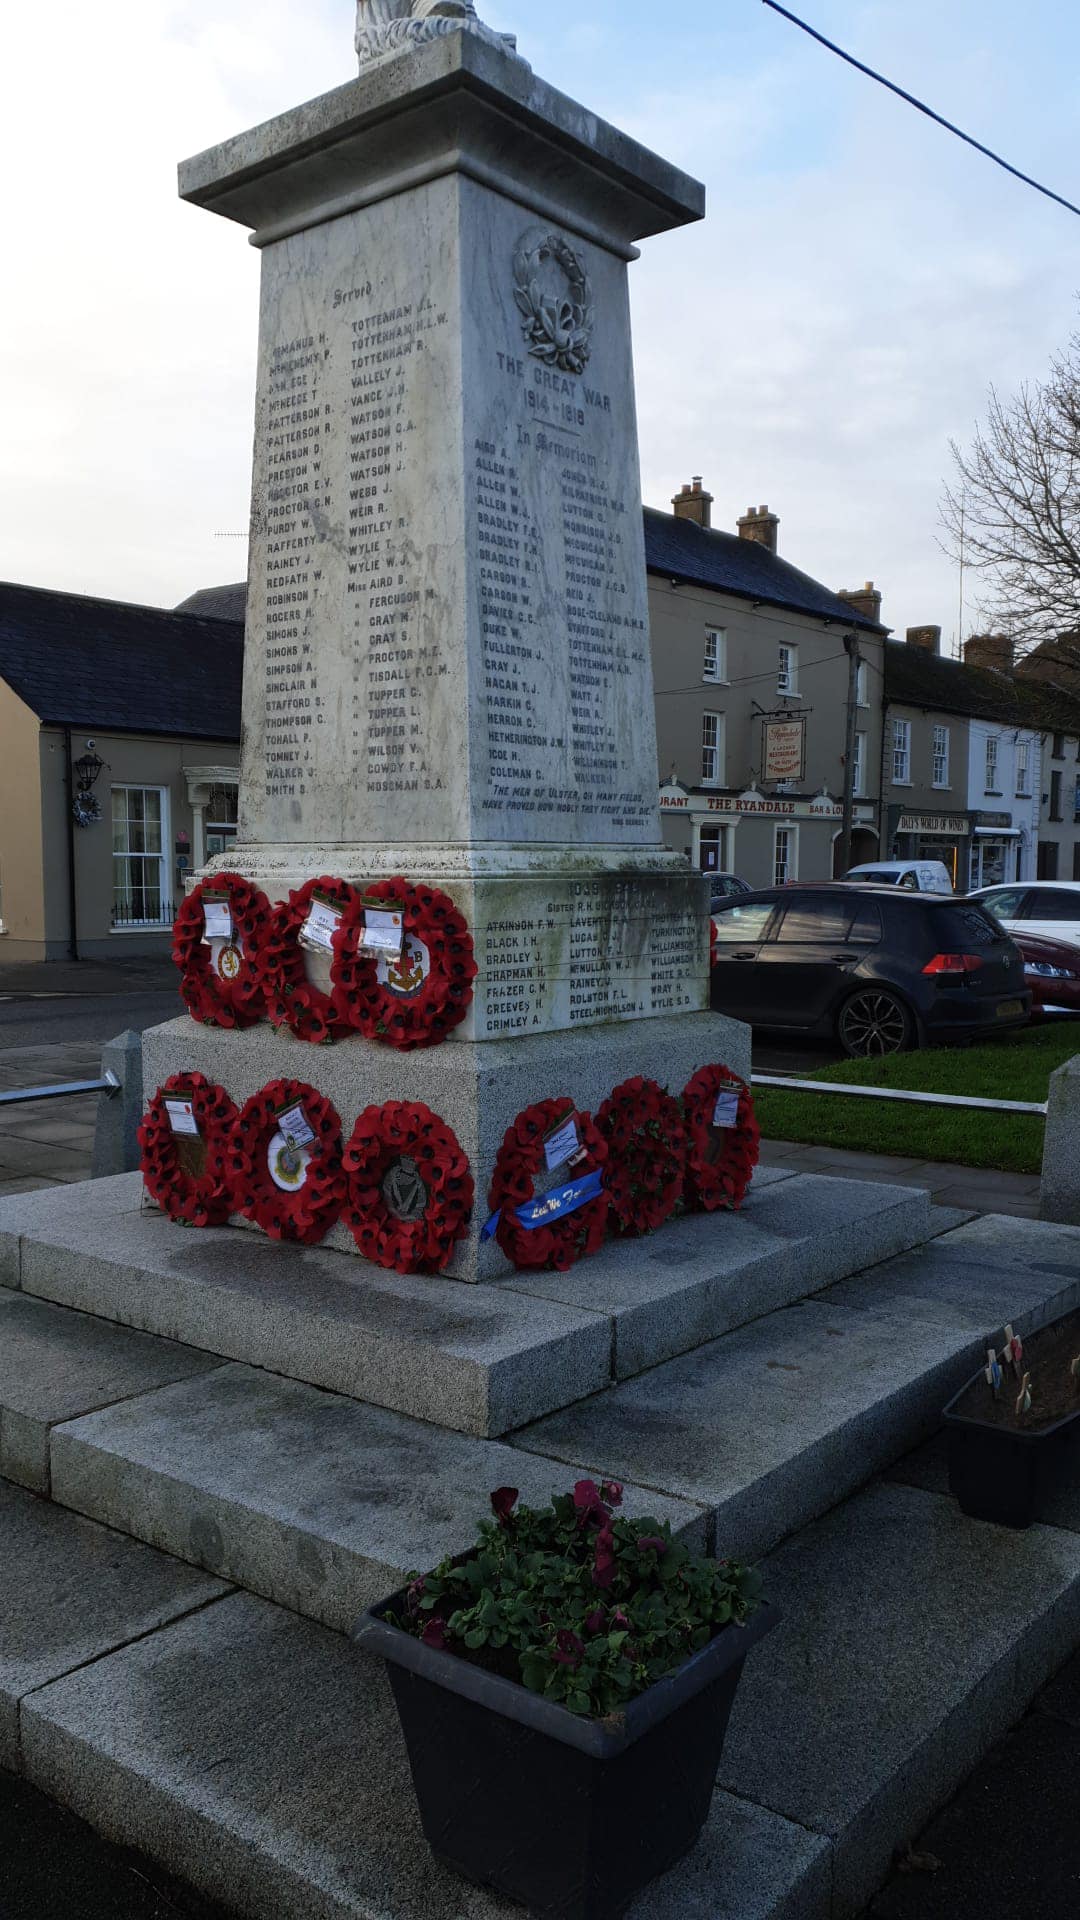 Support for repair of Moy memorial after recent spate of attacks